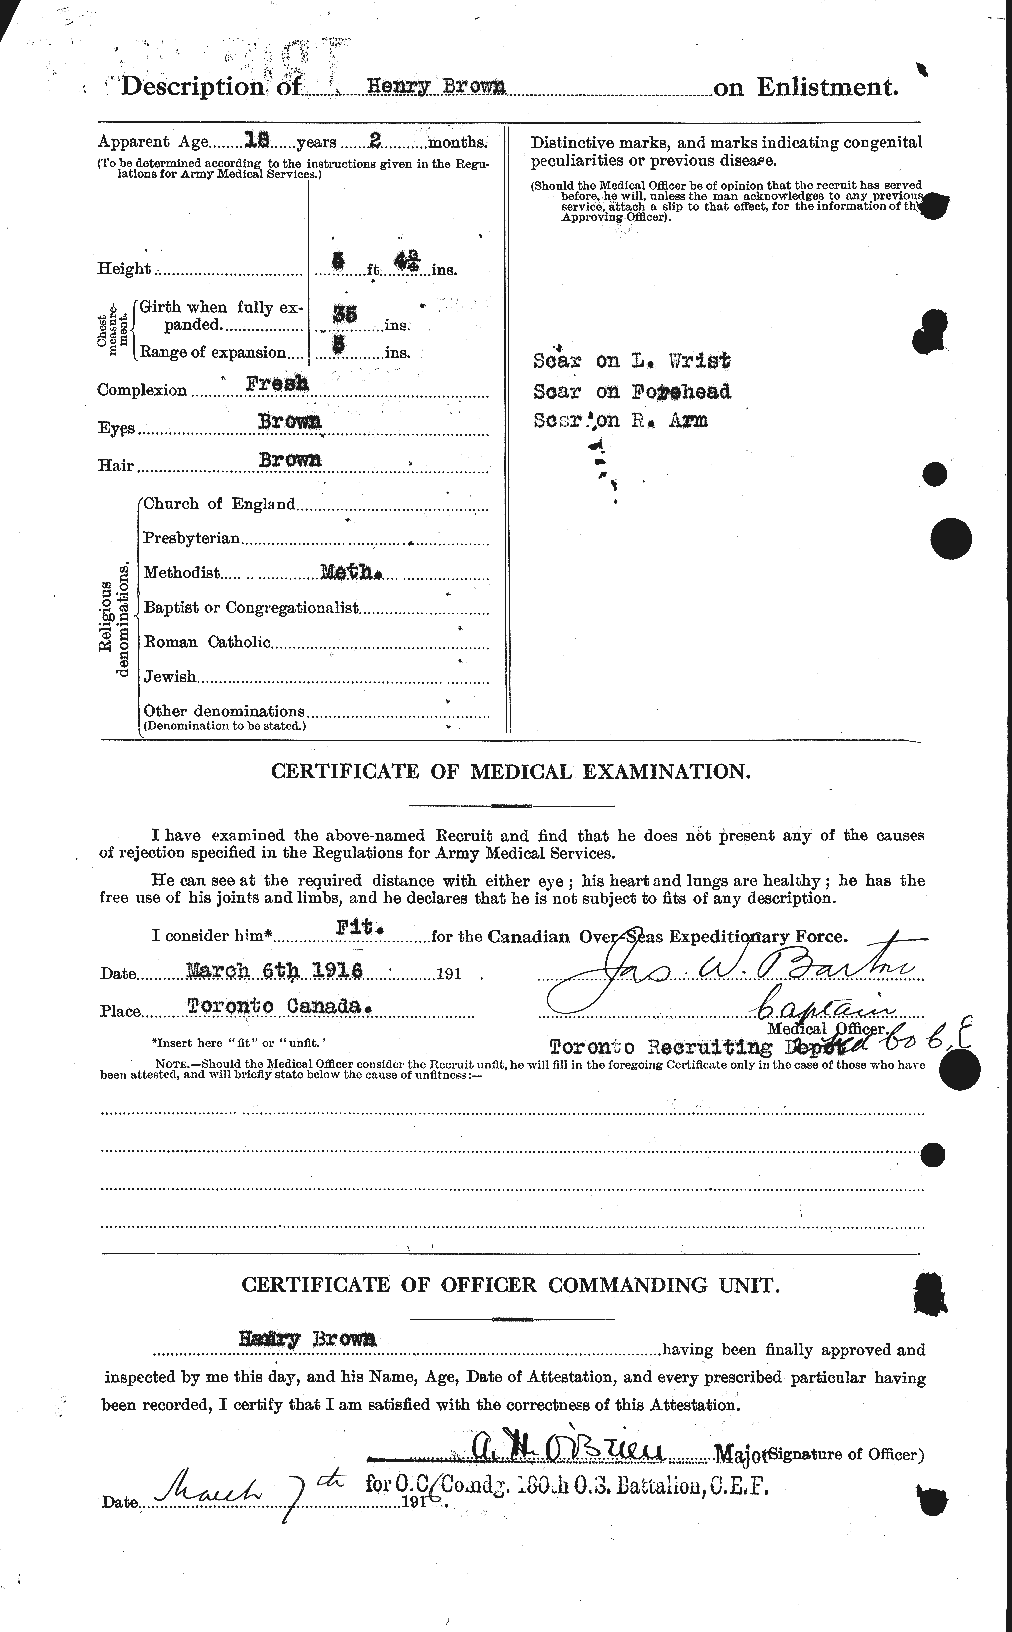 Personnel Records of the First World War - CEF 265515b